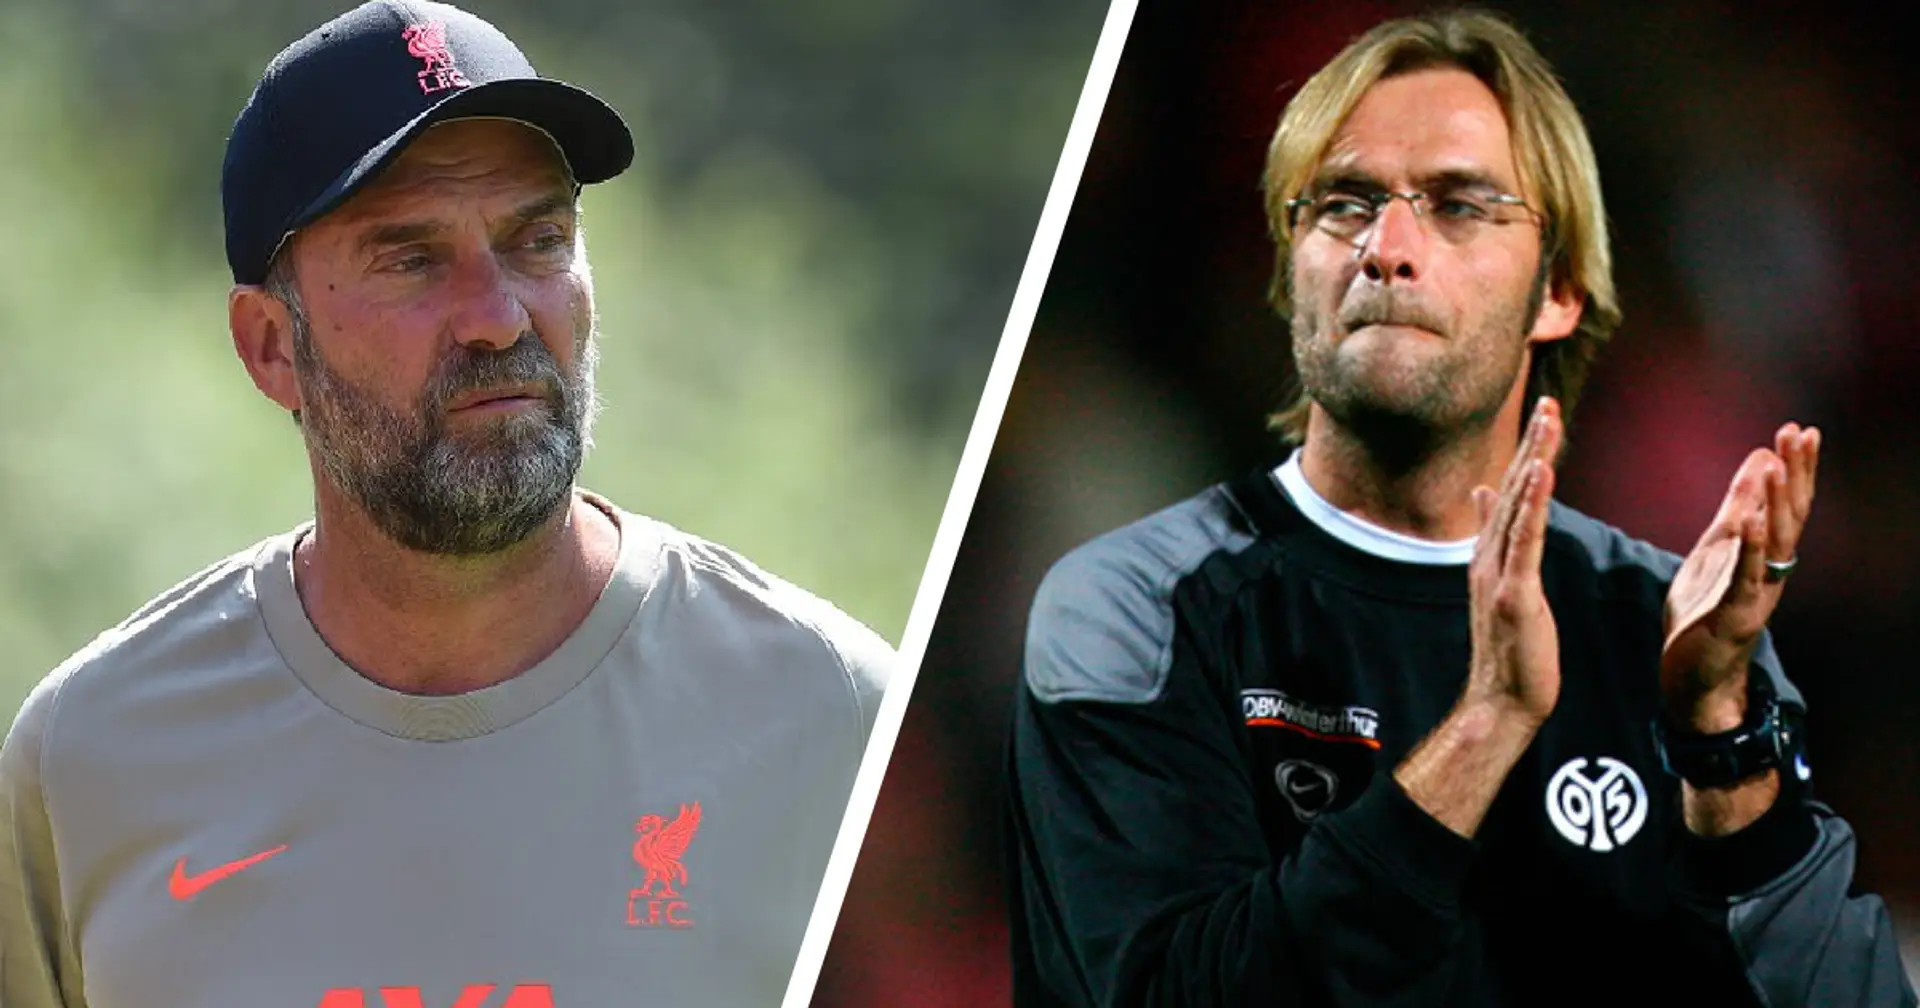 Klopp opens up on his relationship with Mainz ahead of Friday's friendly clash